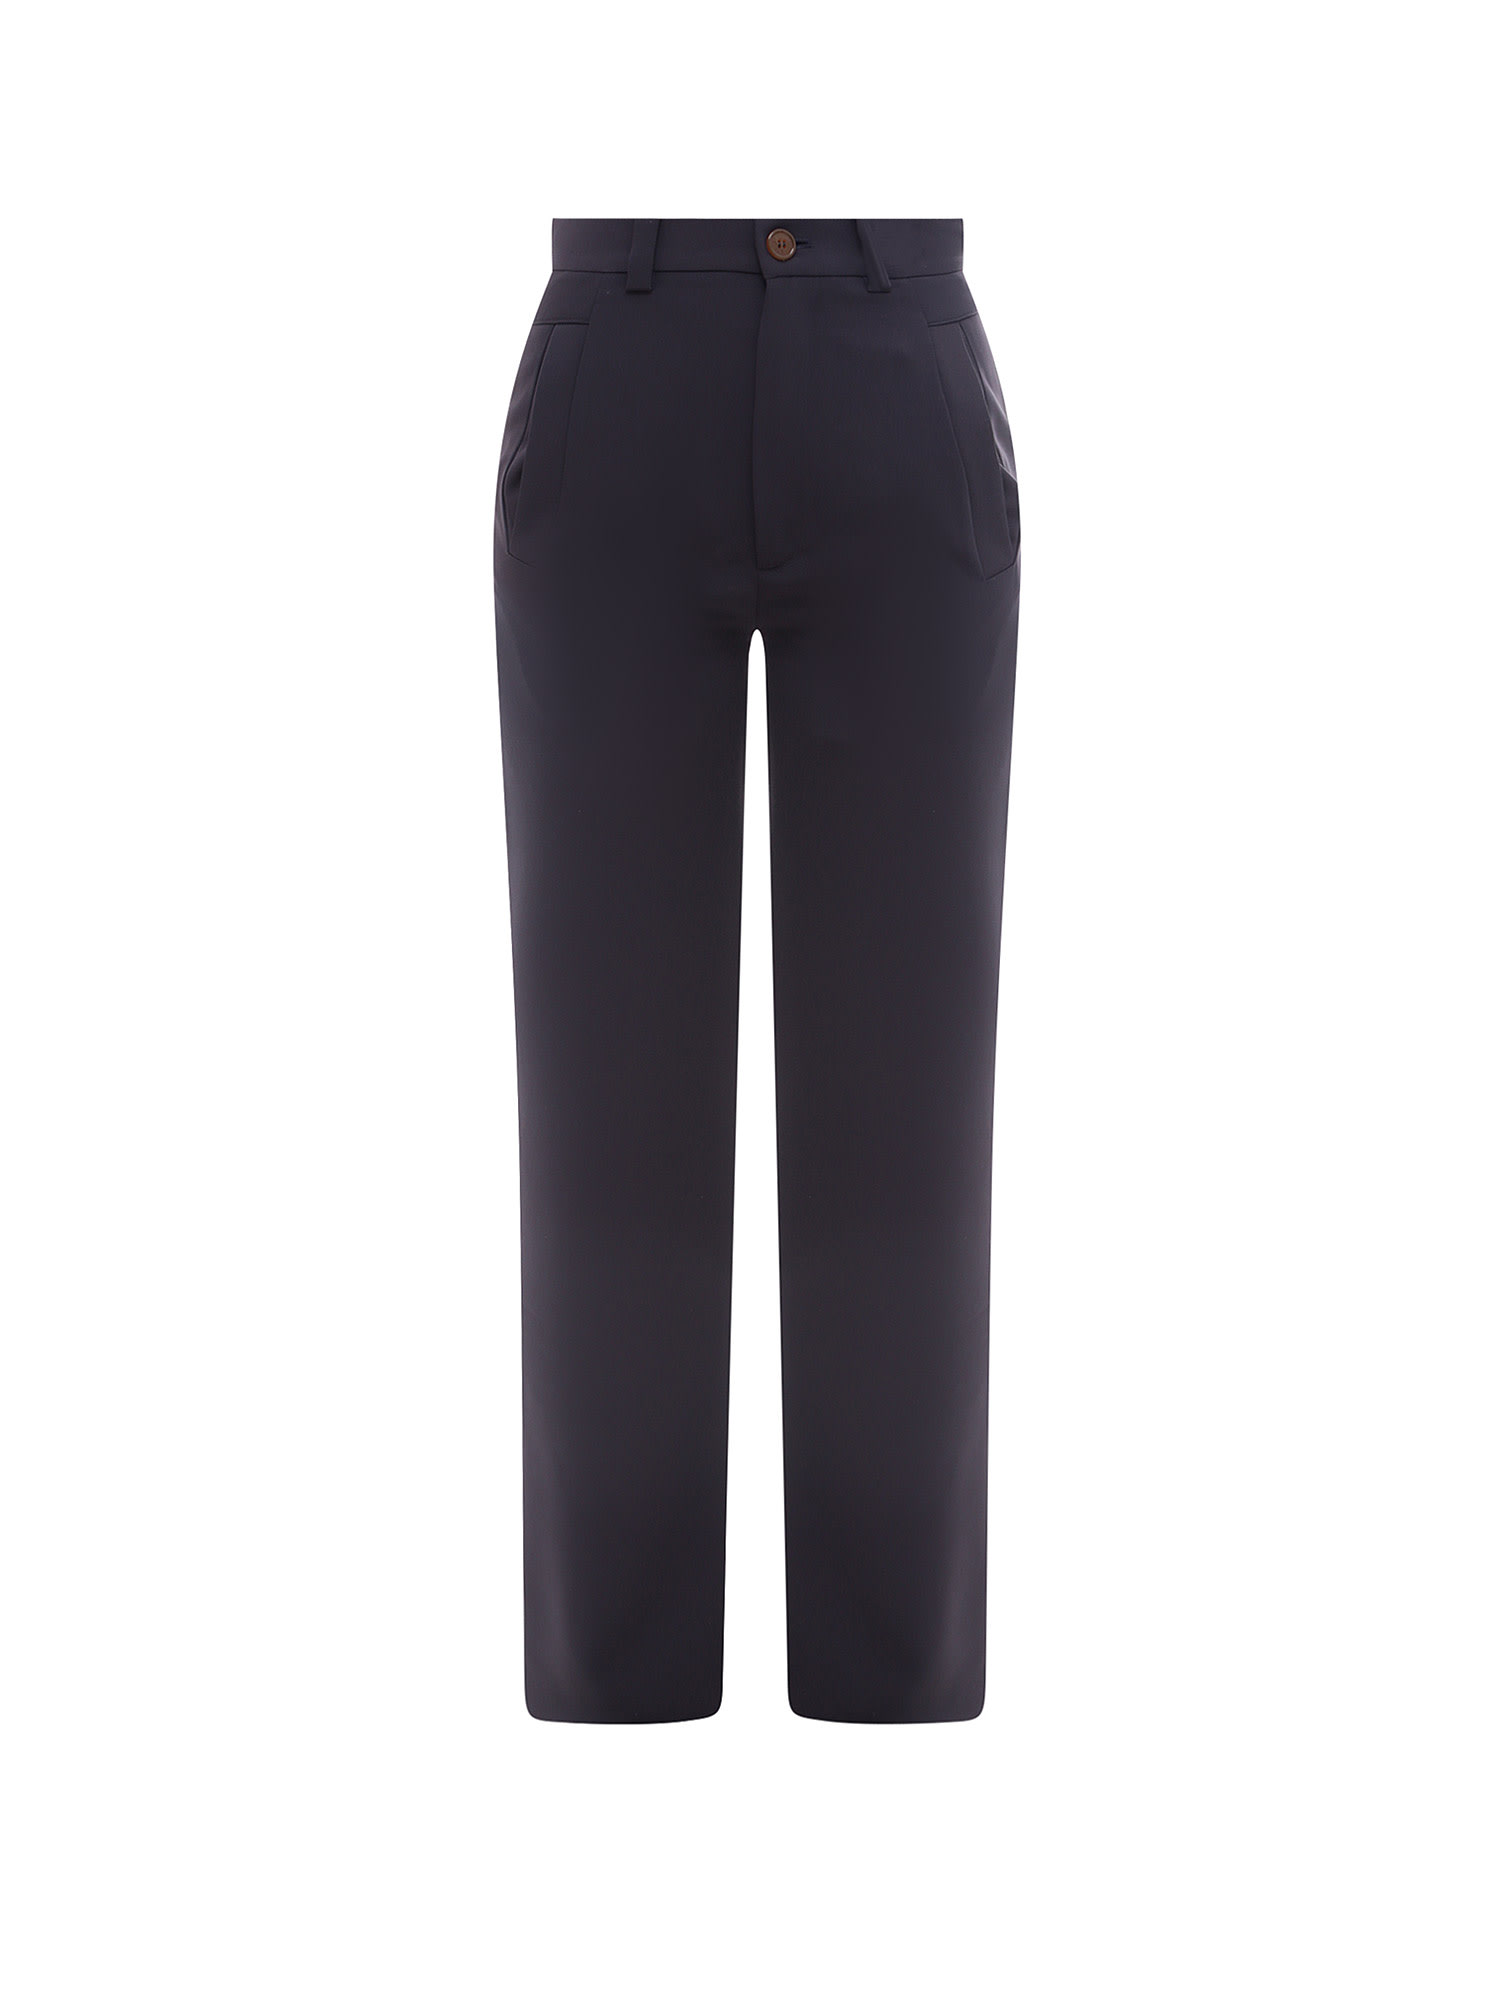 VIVIENNE WESTWOOD RAY TROUSER